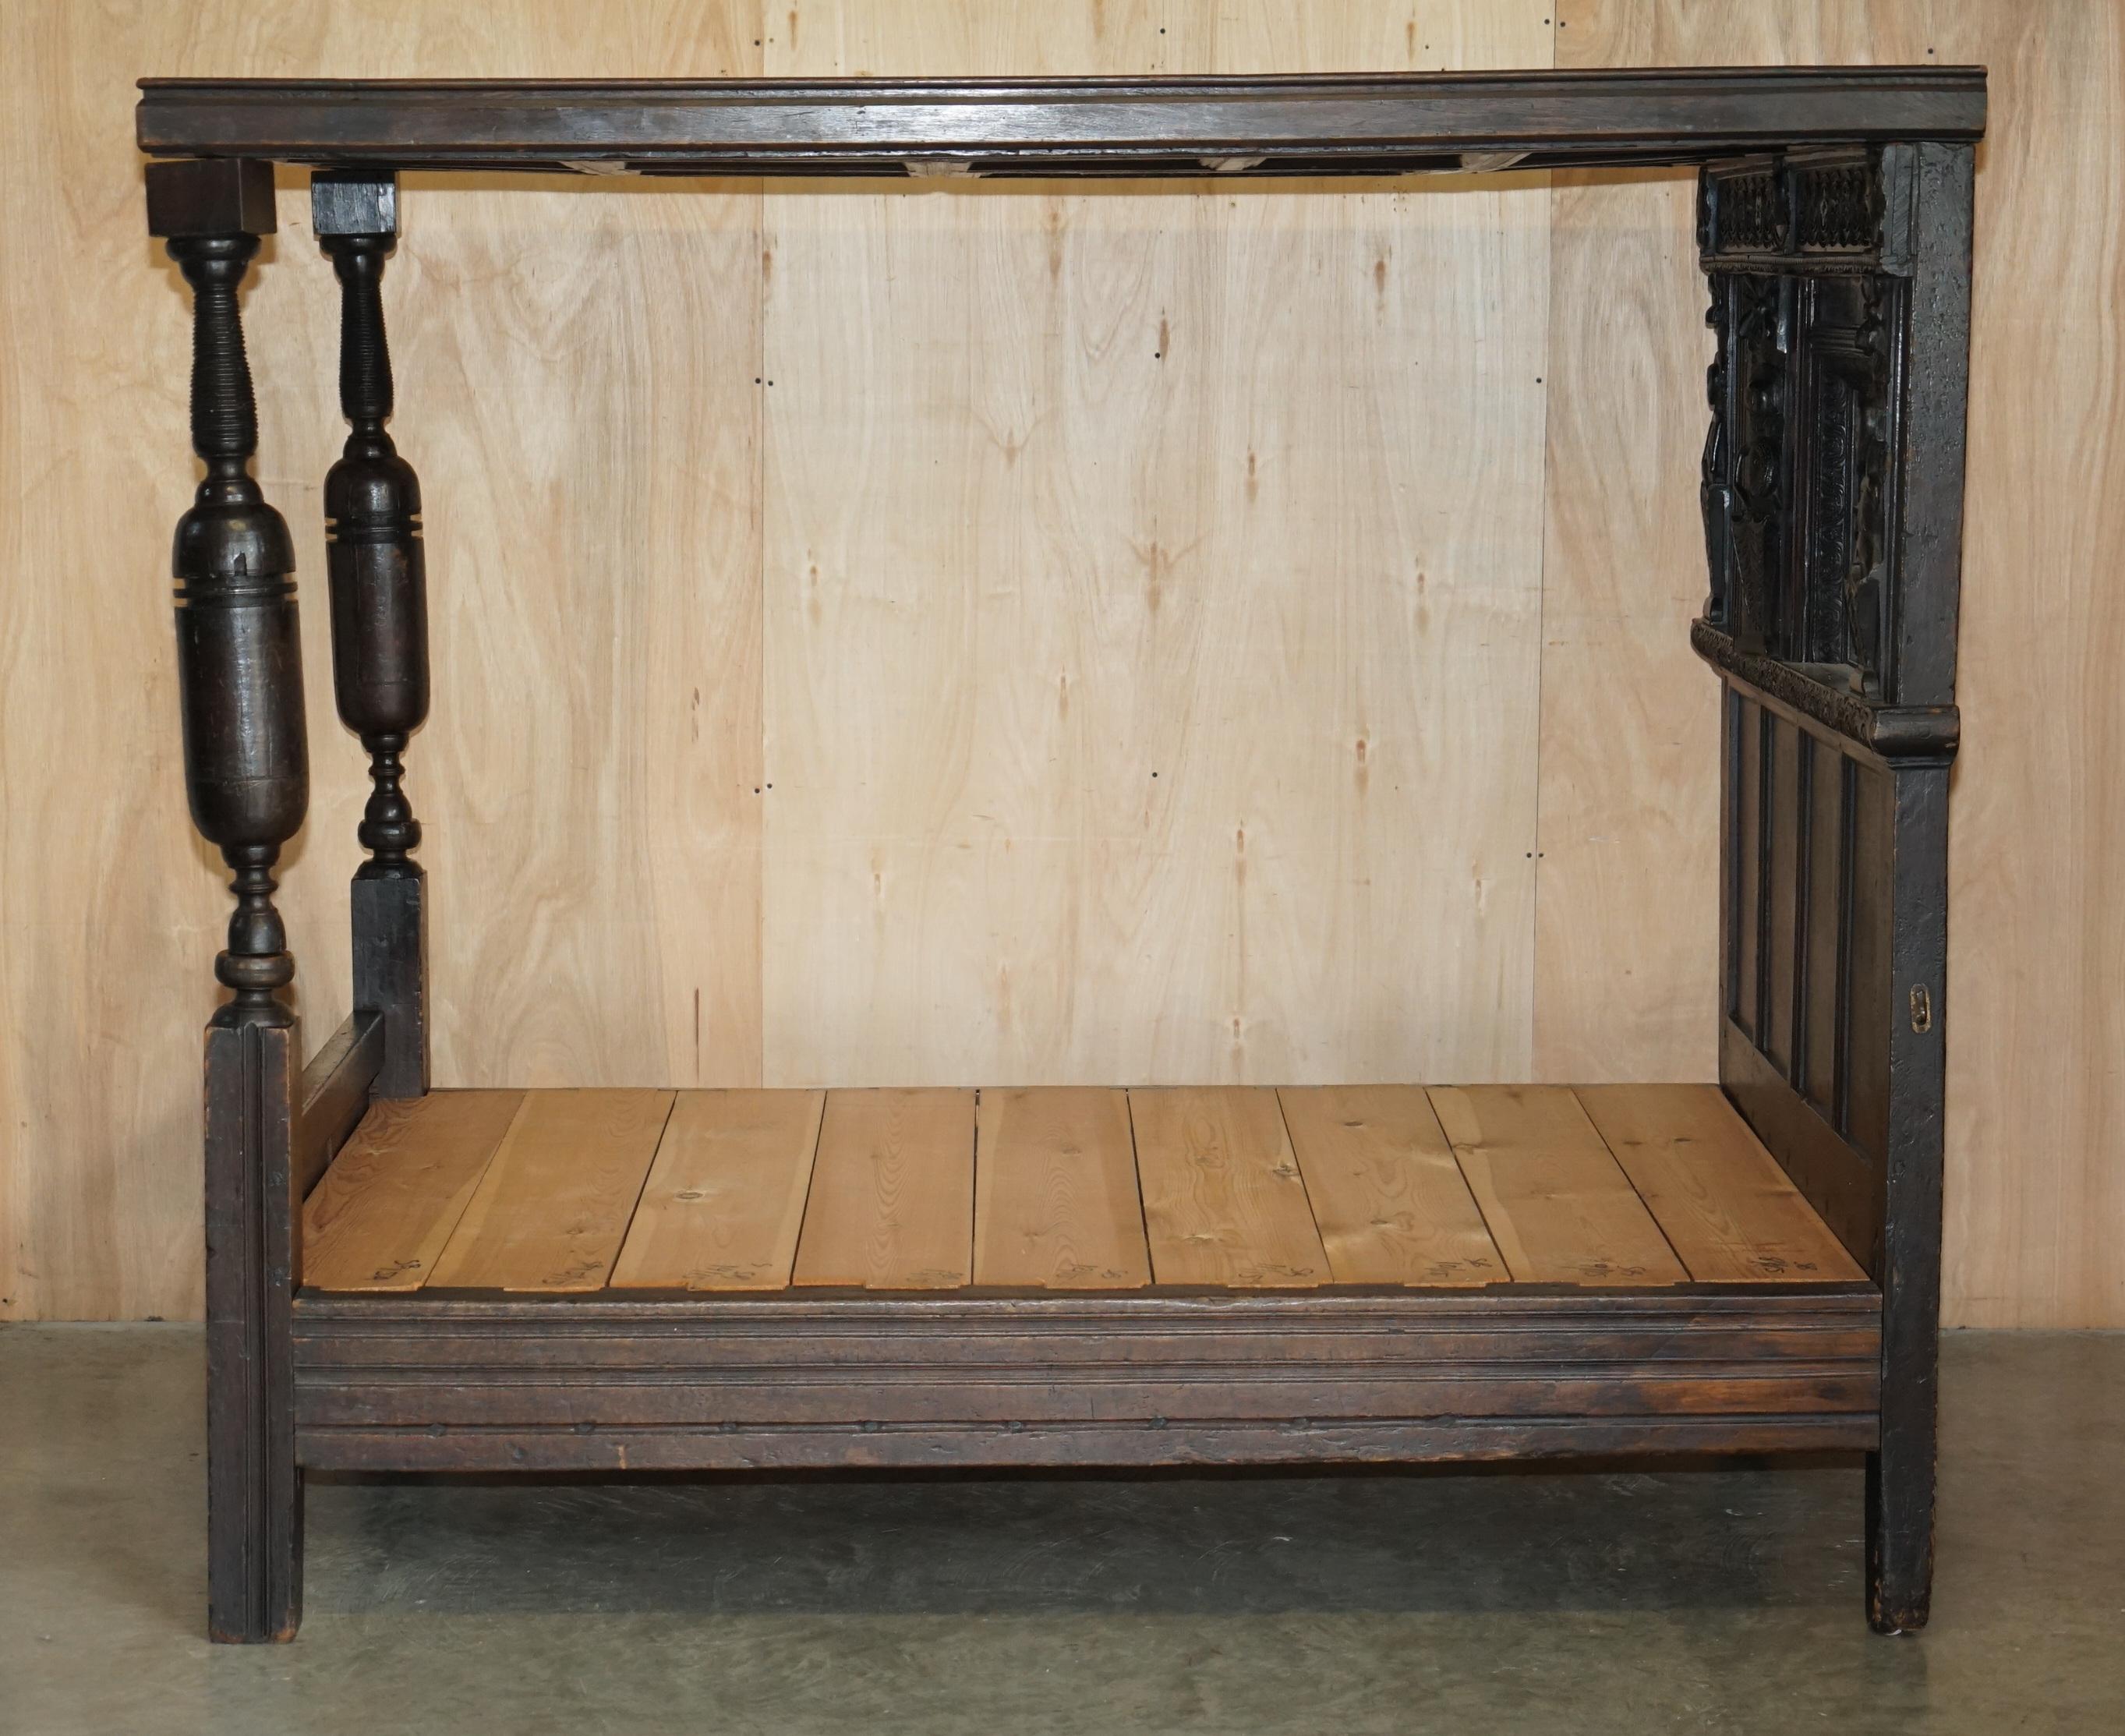 17TH CENTURY JACOBEAN WILLIAM III CIRCA 1650 ENGLiSH OAK TESTER FOUR POSTER BED For Sale 12